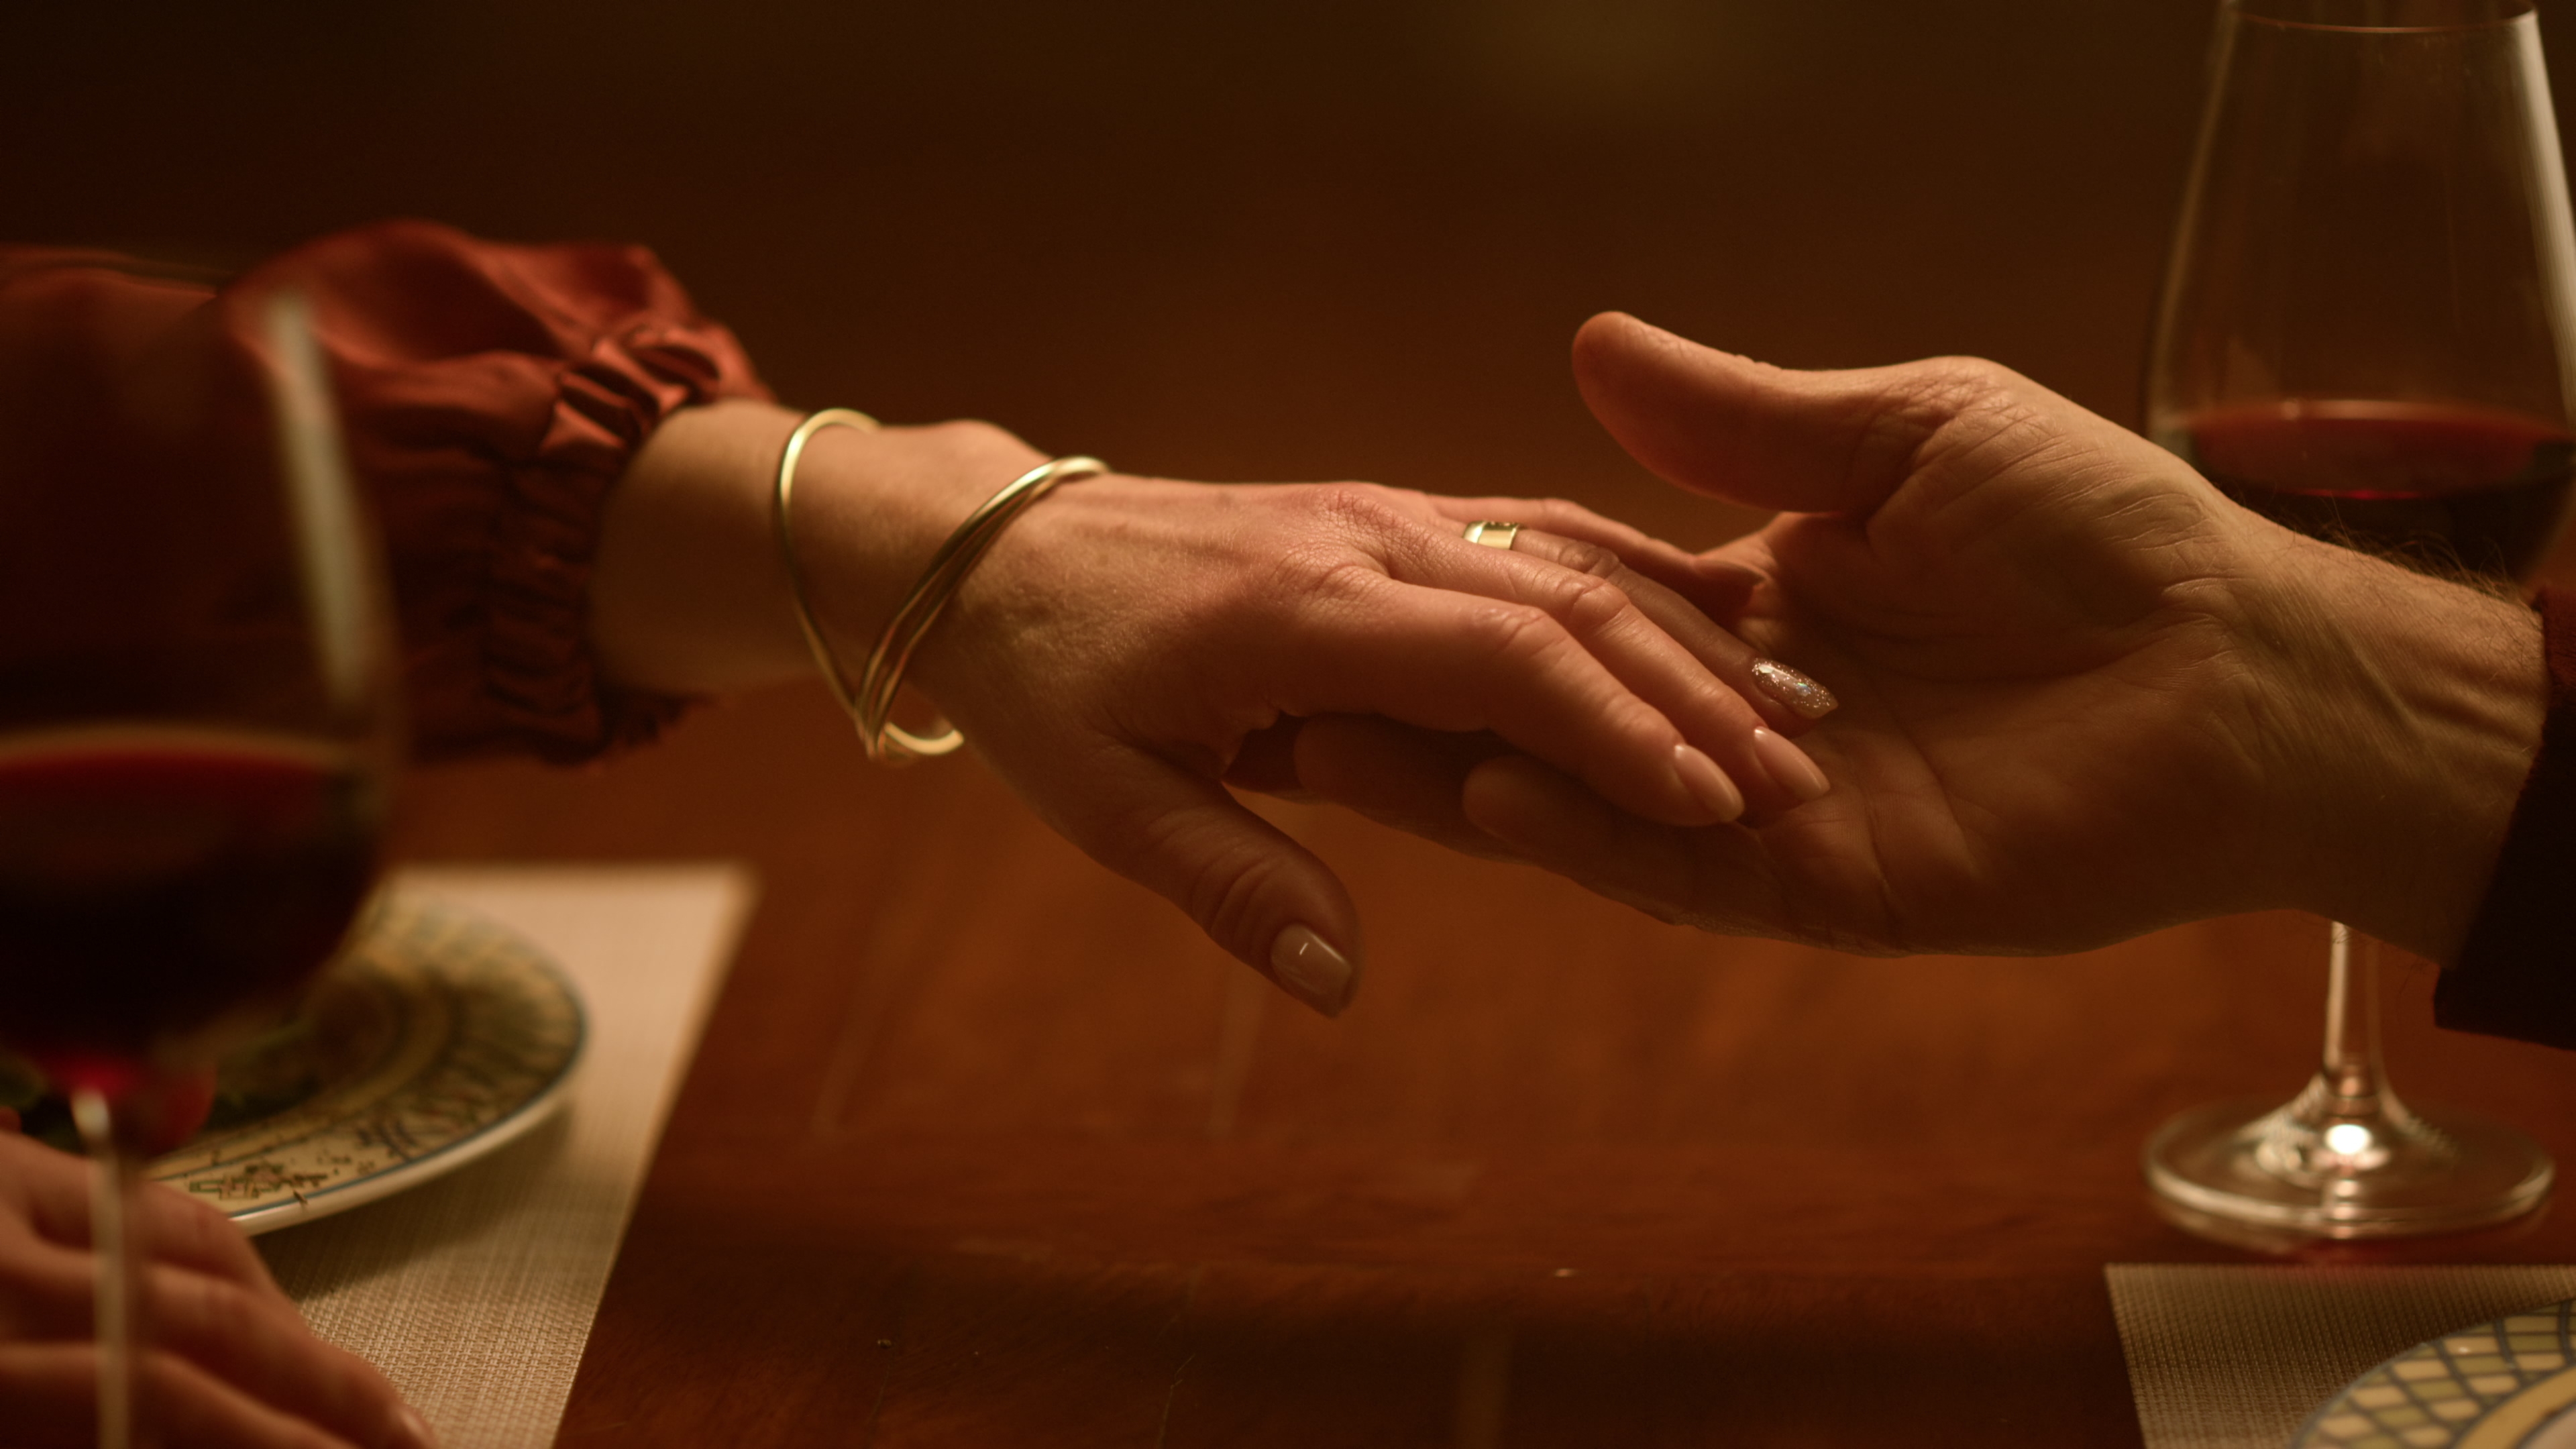 A close-up photo of a couple holding hands during dinner | Source: Shutterstock